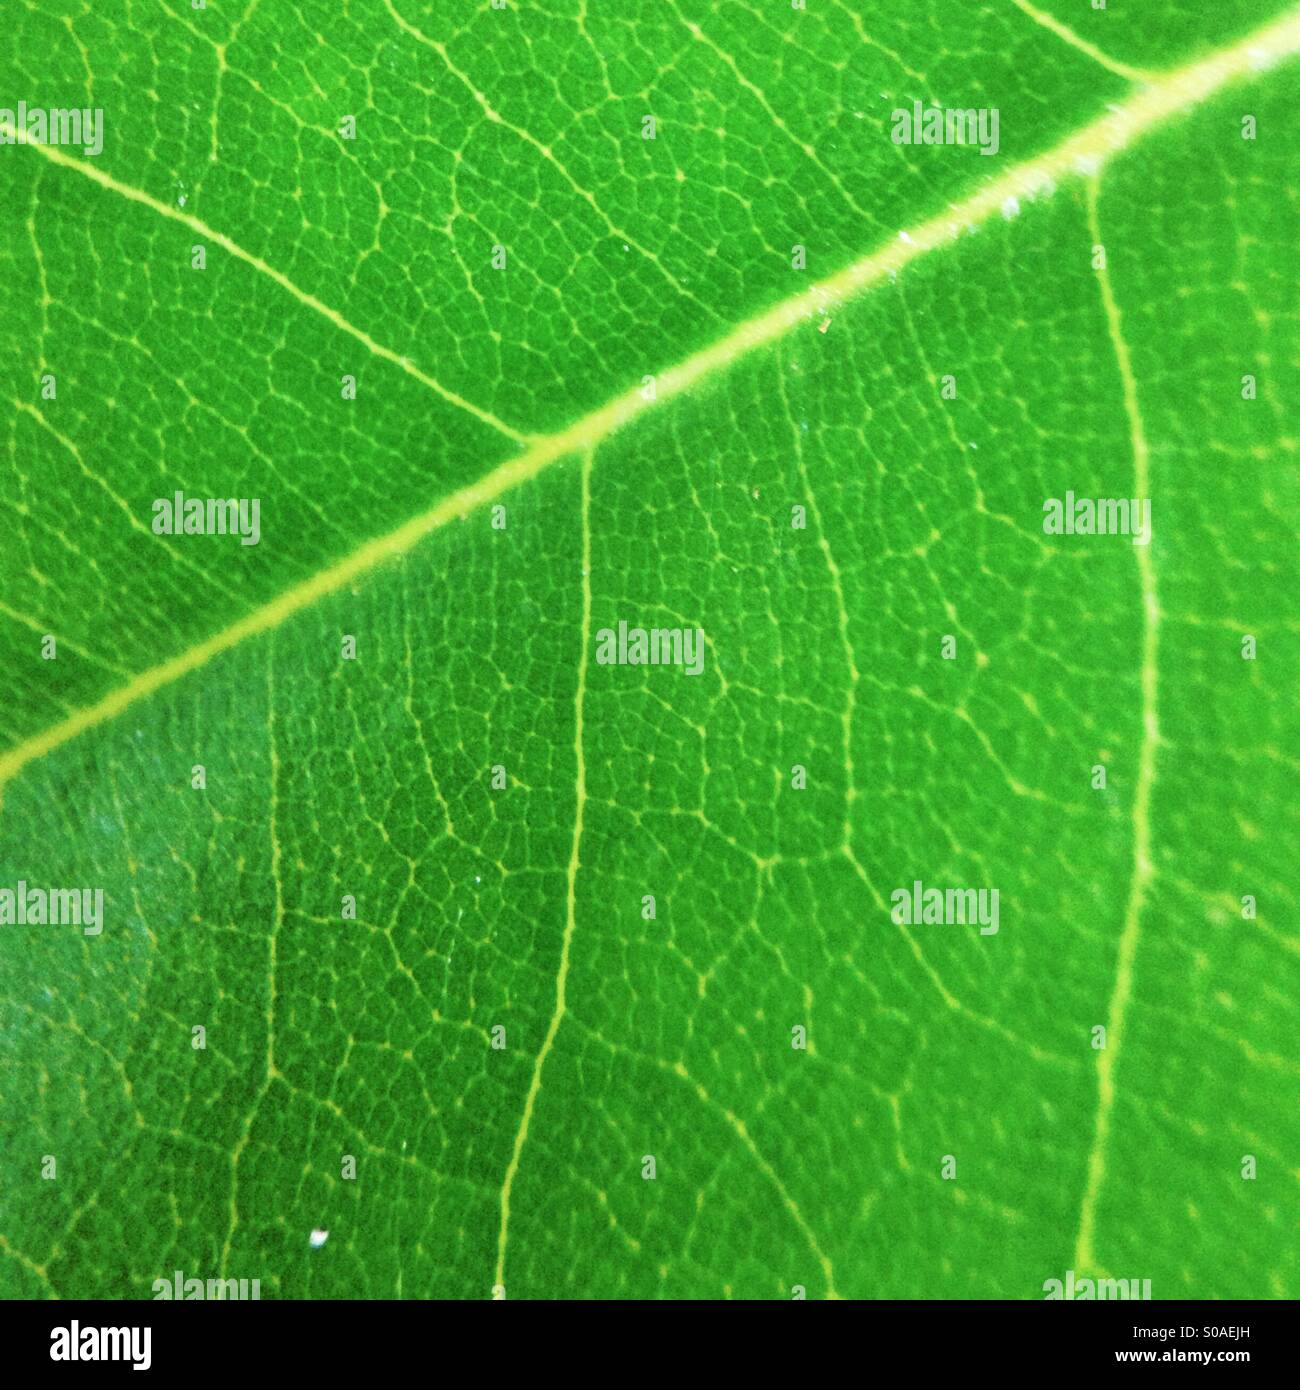 Rhododendron leaf close up Stock Photo